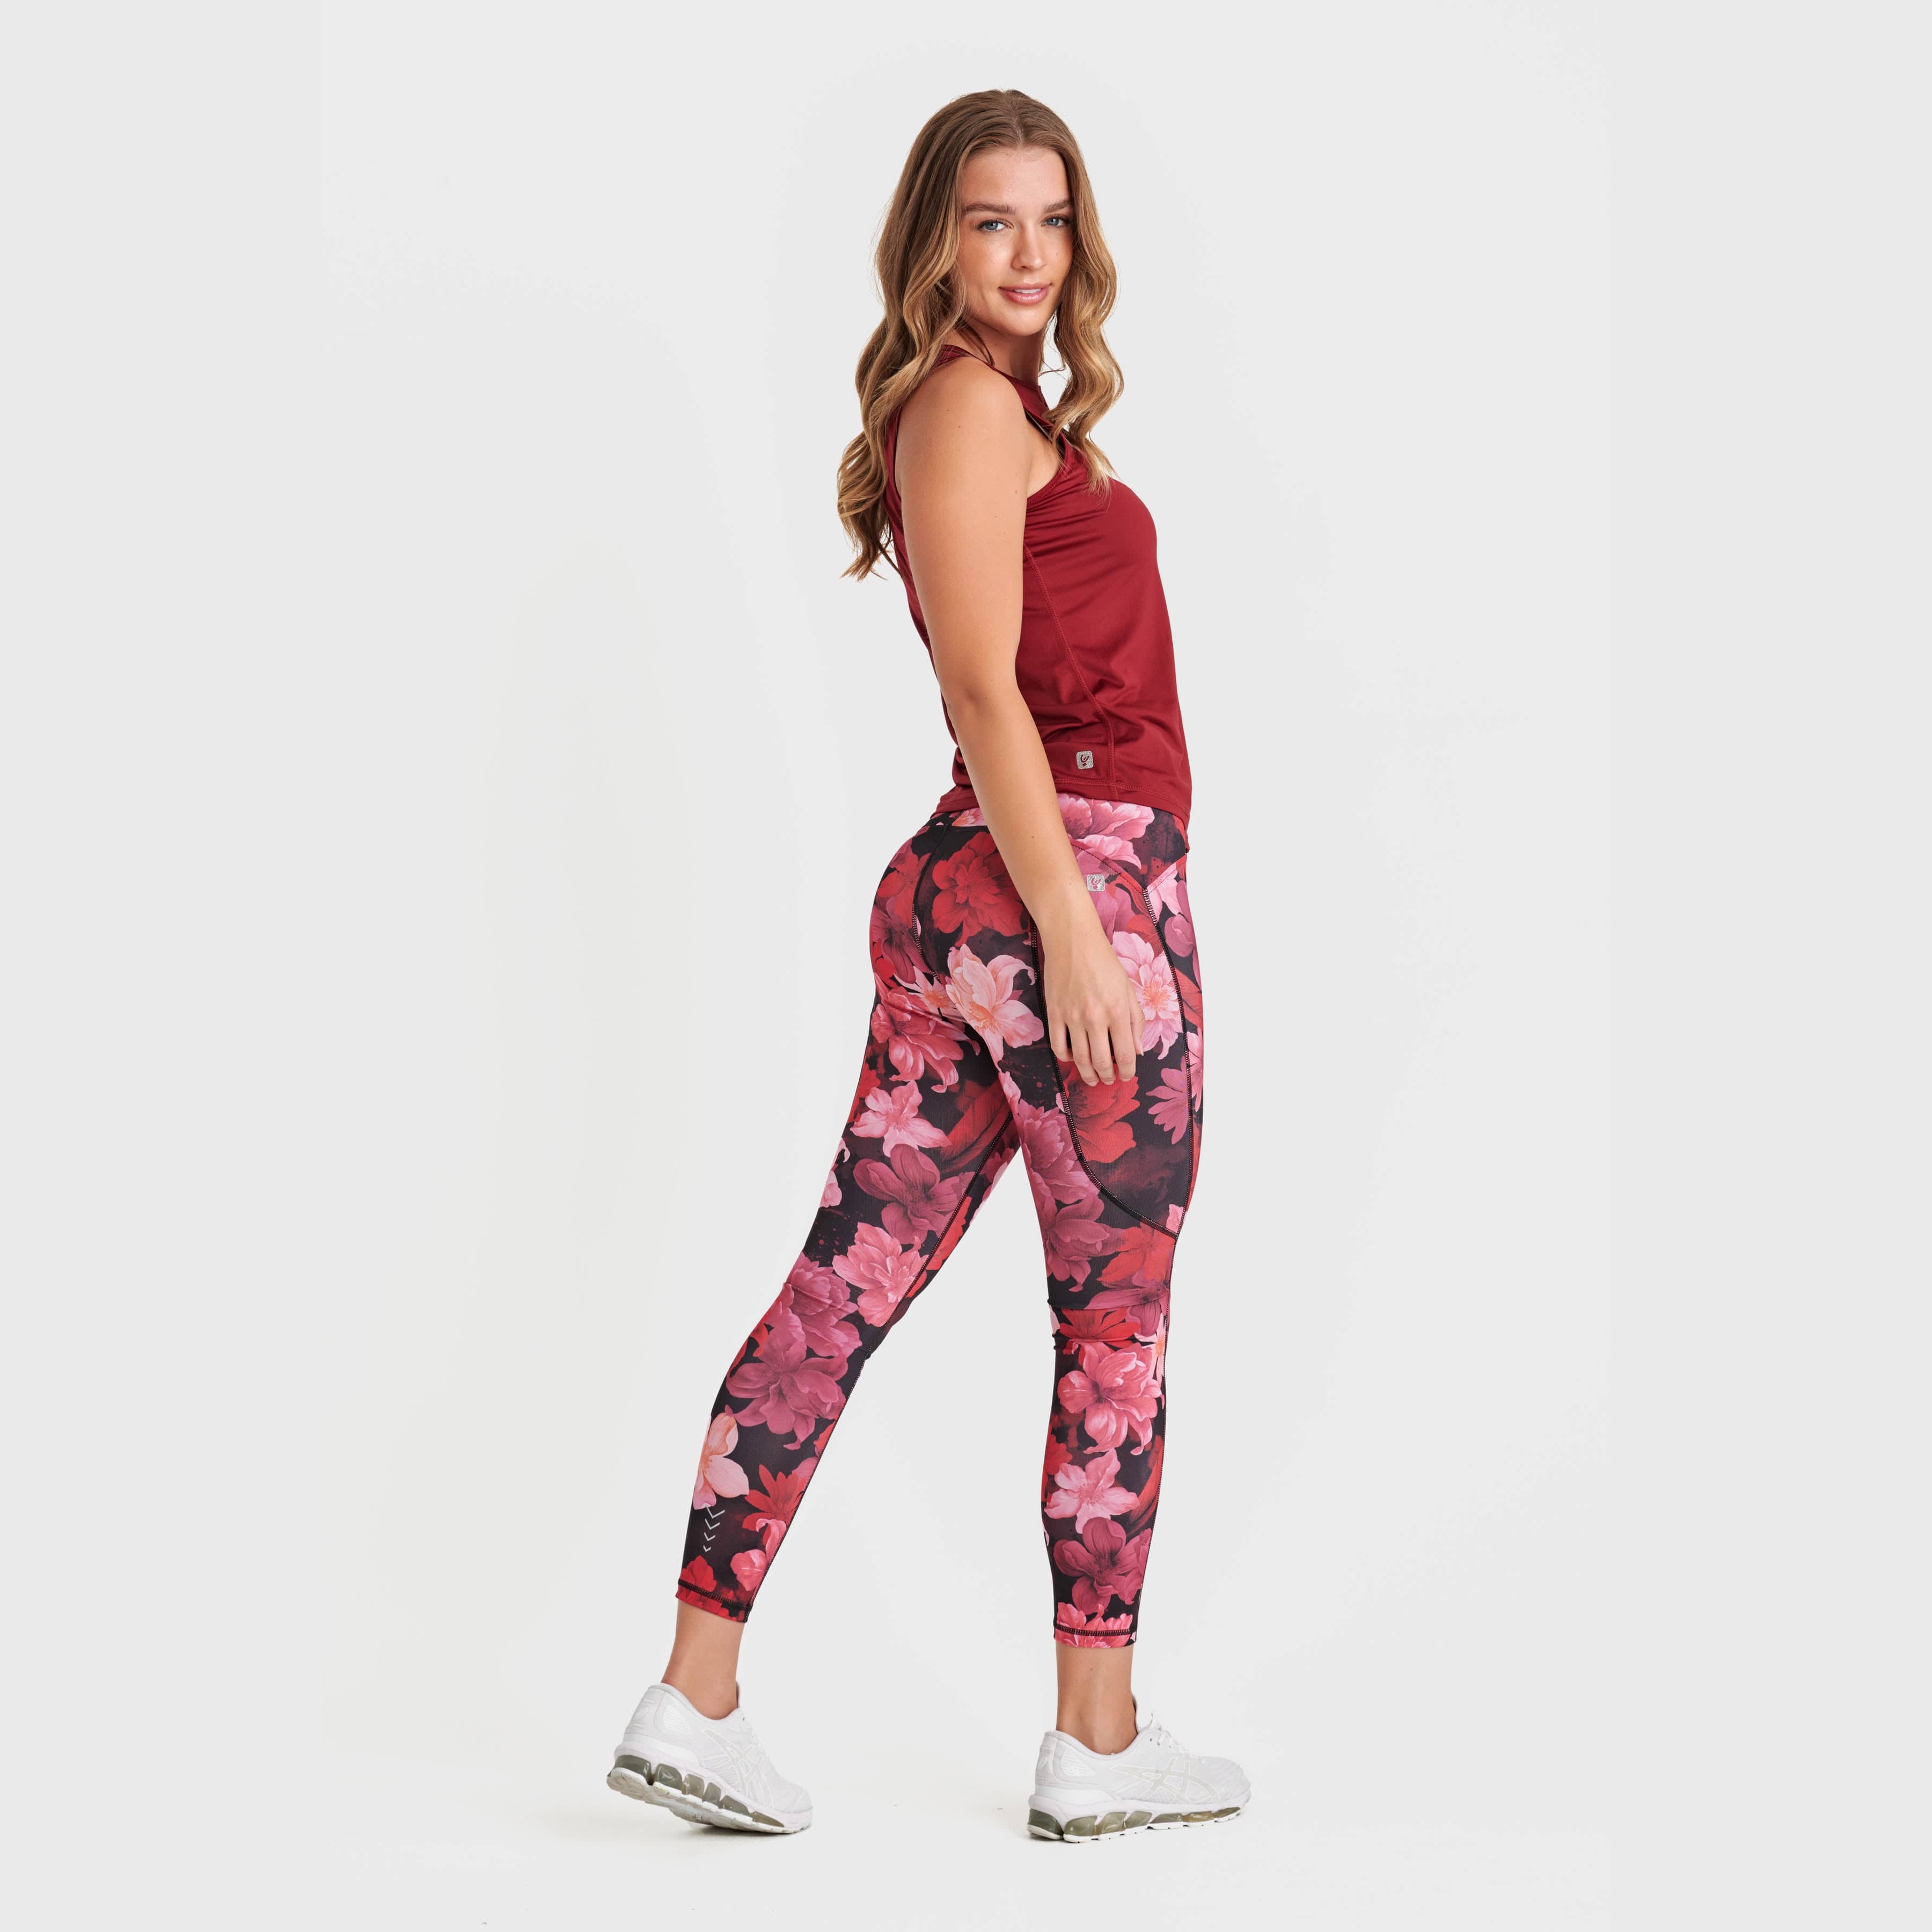 Superfit All Over Flower Print - Super High Waisted - Petite Length - Bordeaux 1